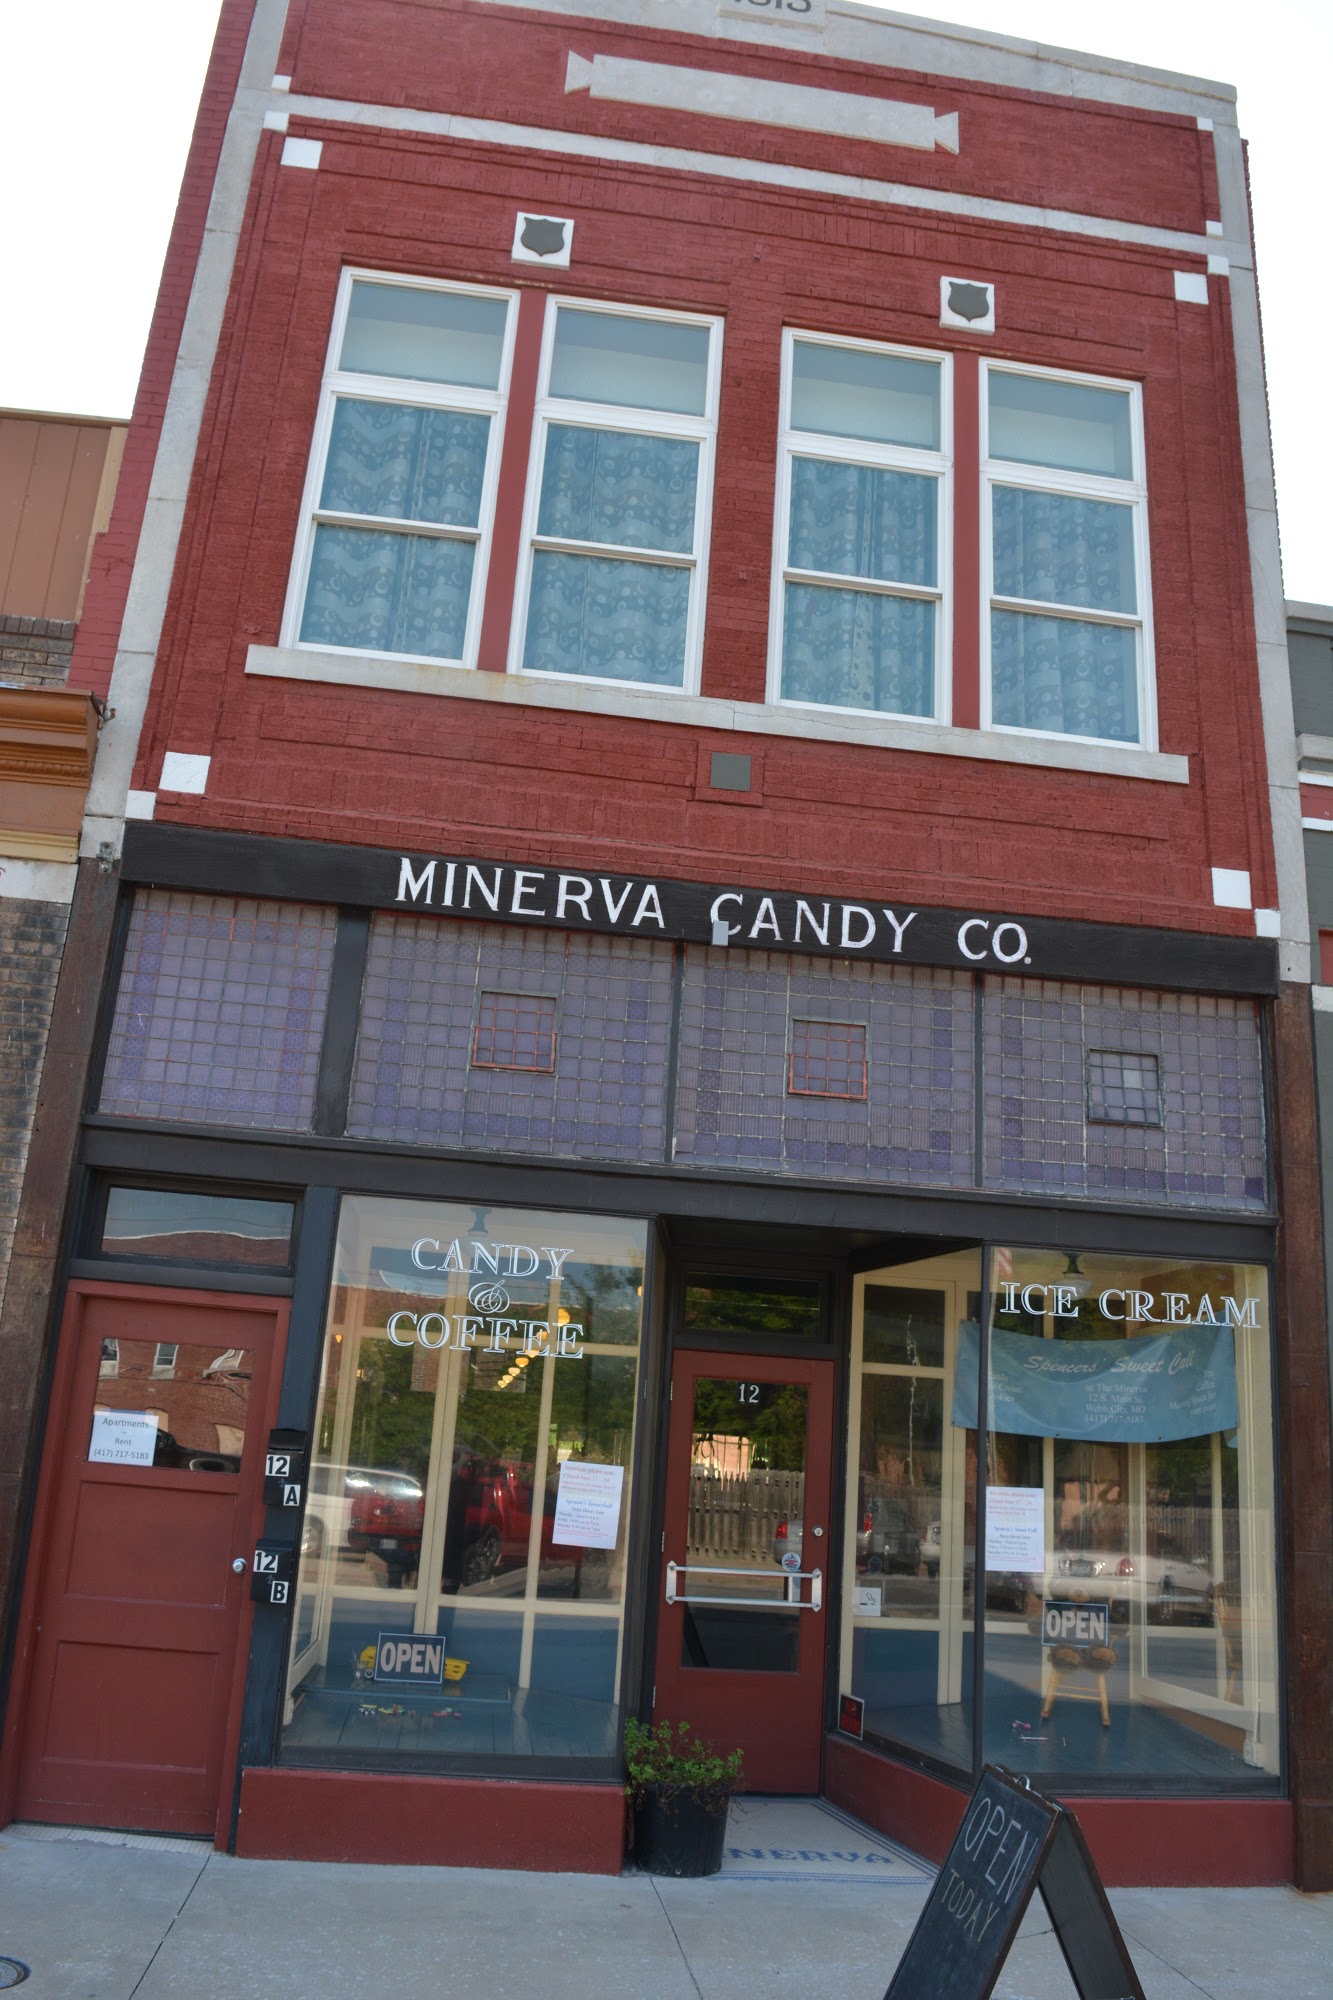 Spencers' Sweet Call at the Minerva